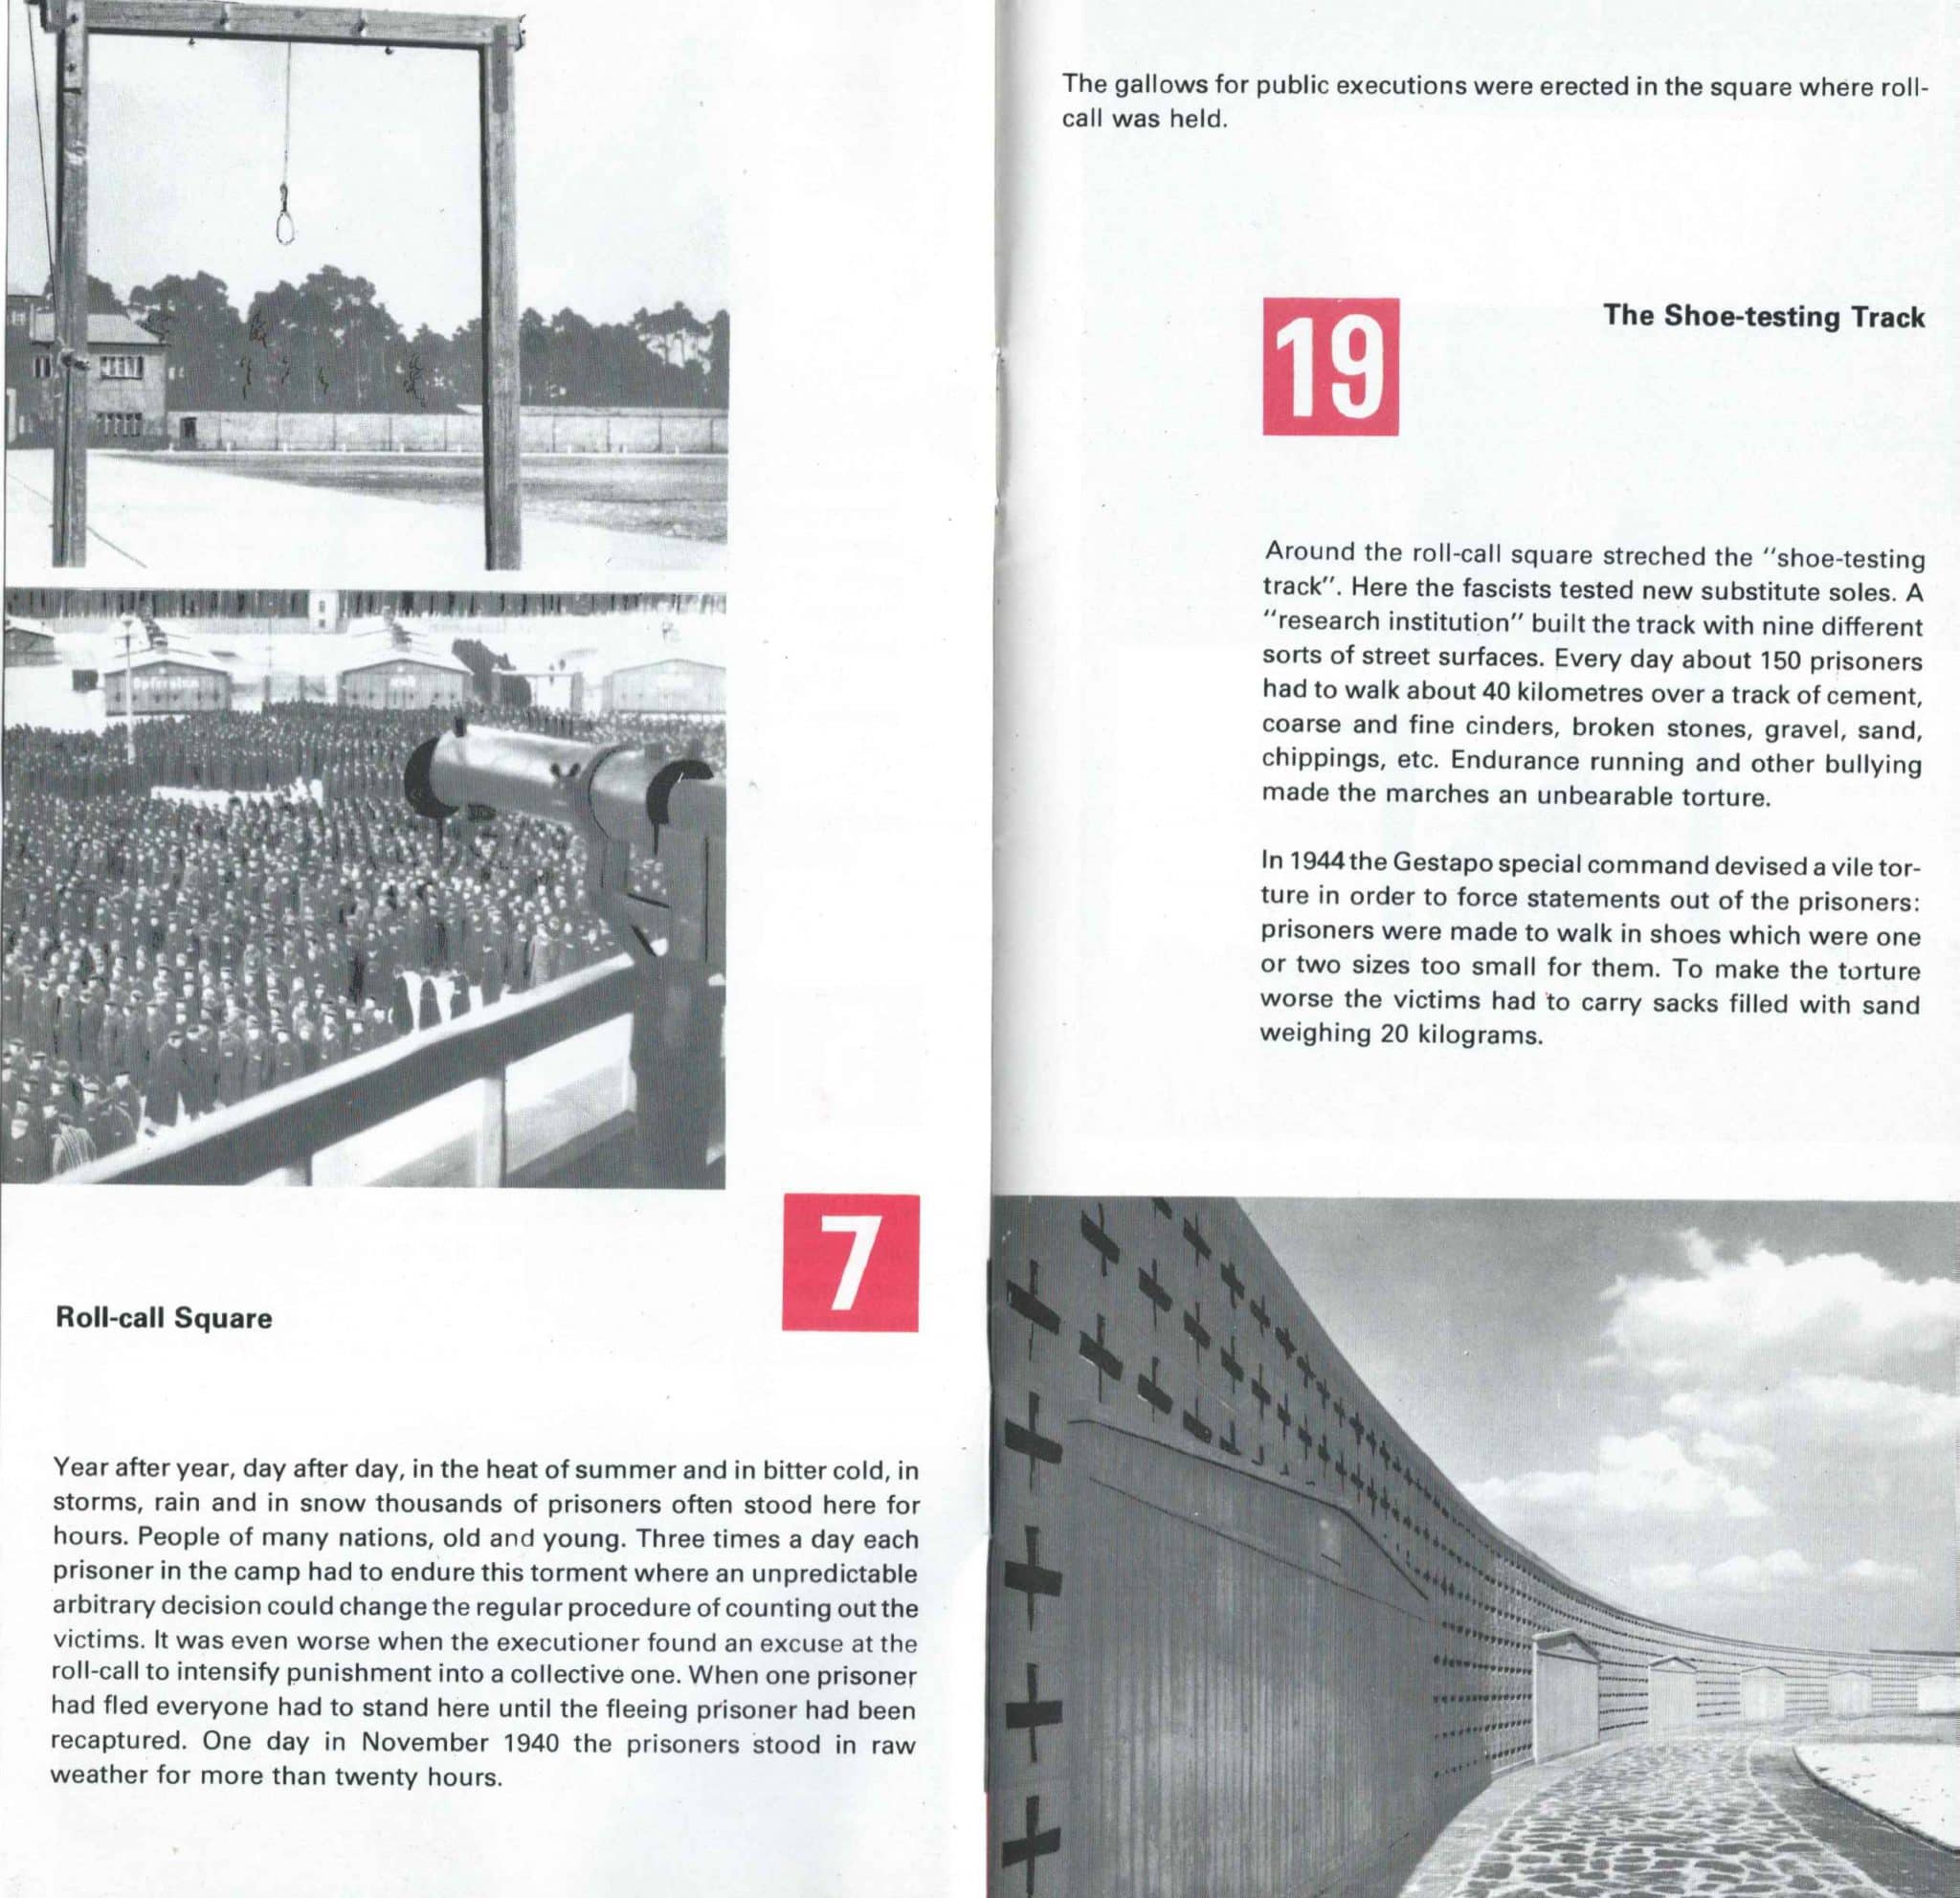 Sachsenhausen Concentration Camp In The DDR - 5